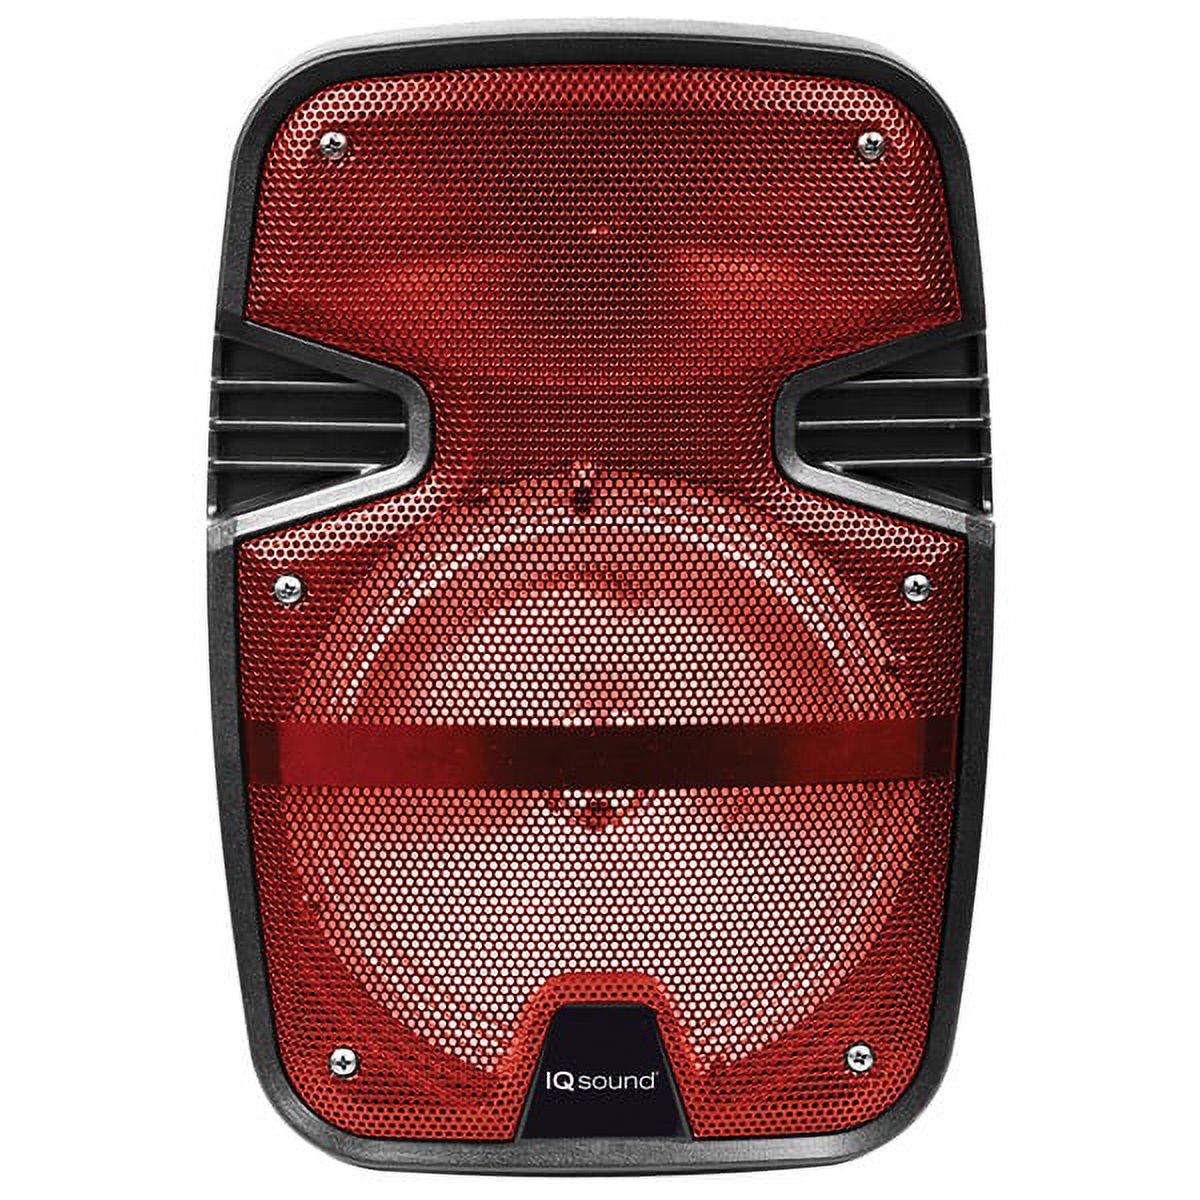 Supersonic 8-inch Tailgate Speaker (red) - image 1 of 2